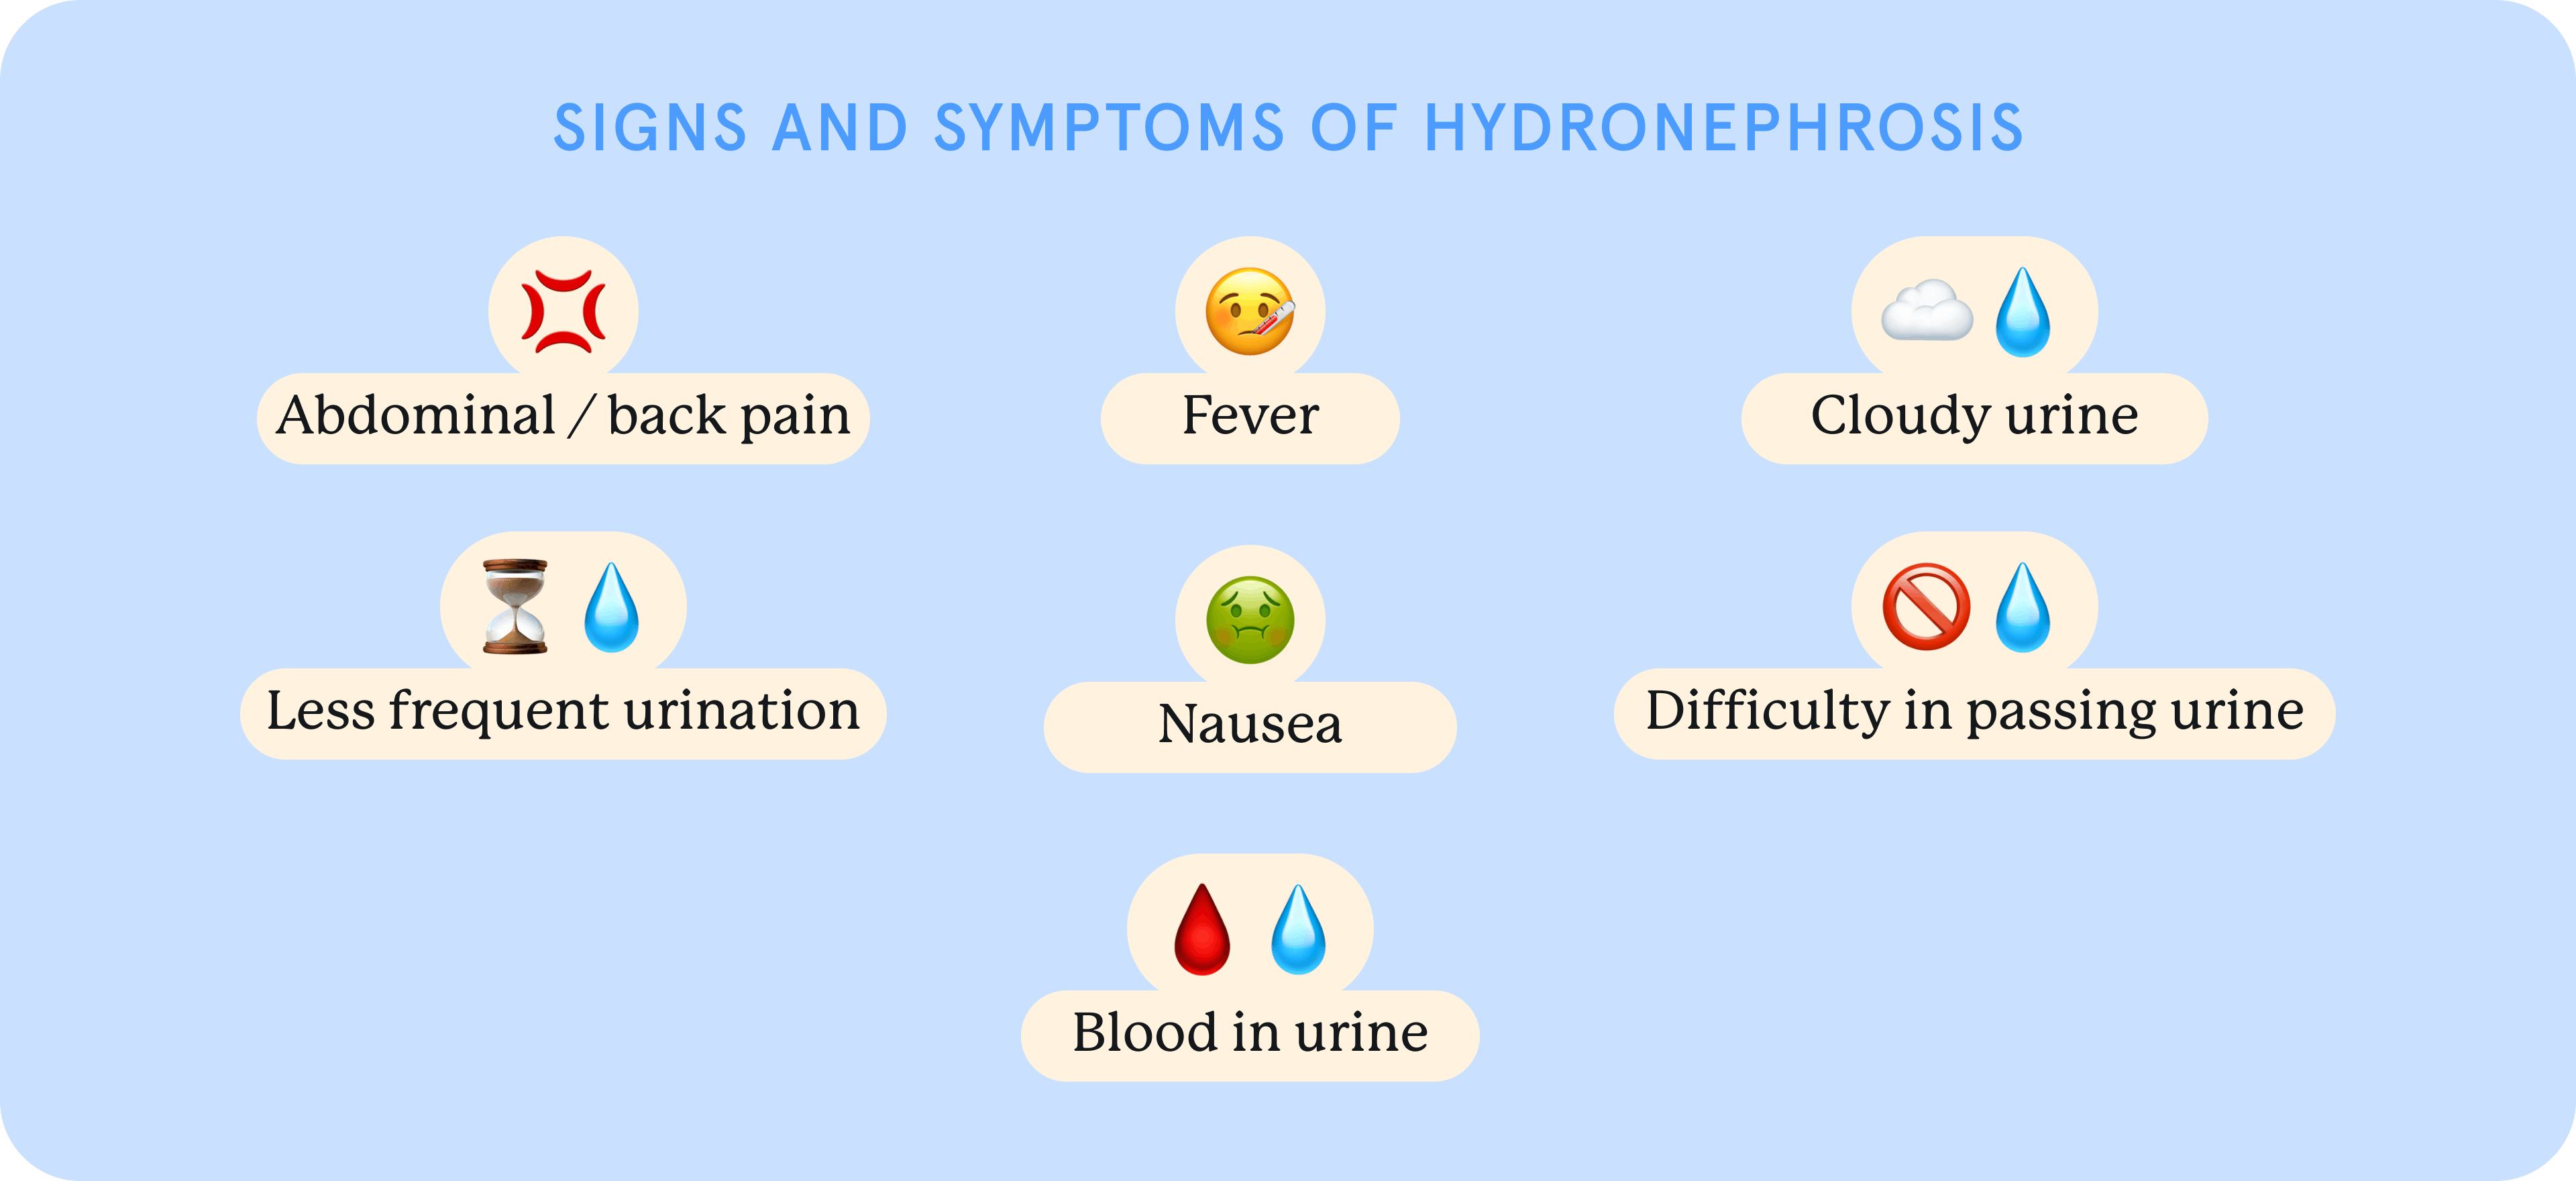 Sings and symptoms of hydronephrosis